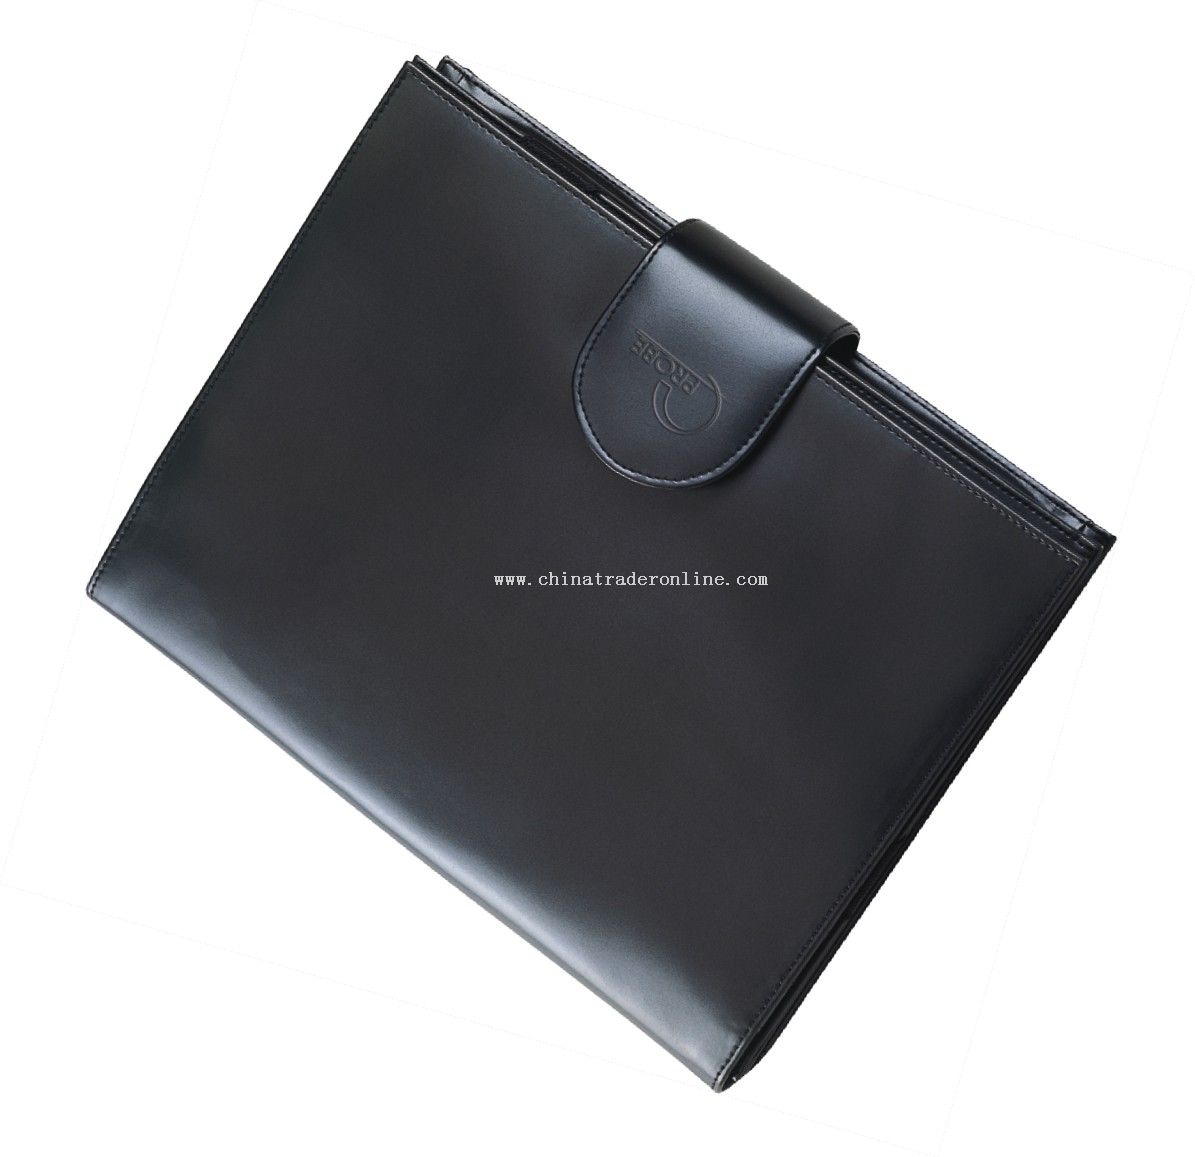 Executive underarm computer bag for laptop computer and documents.